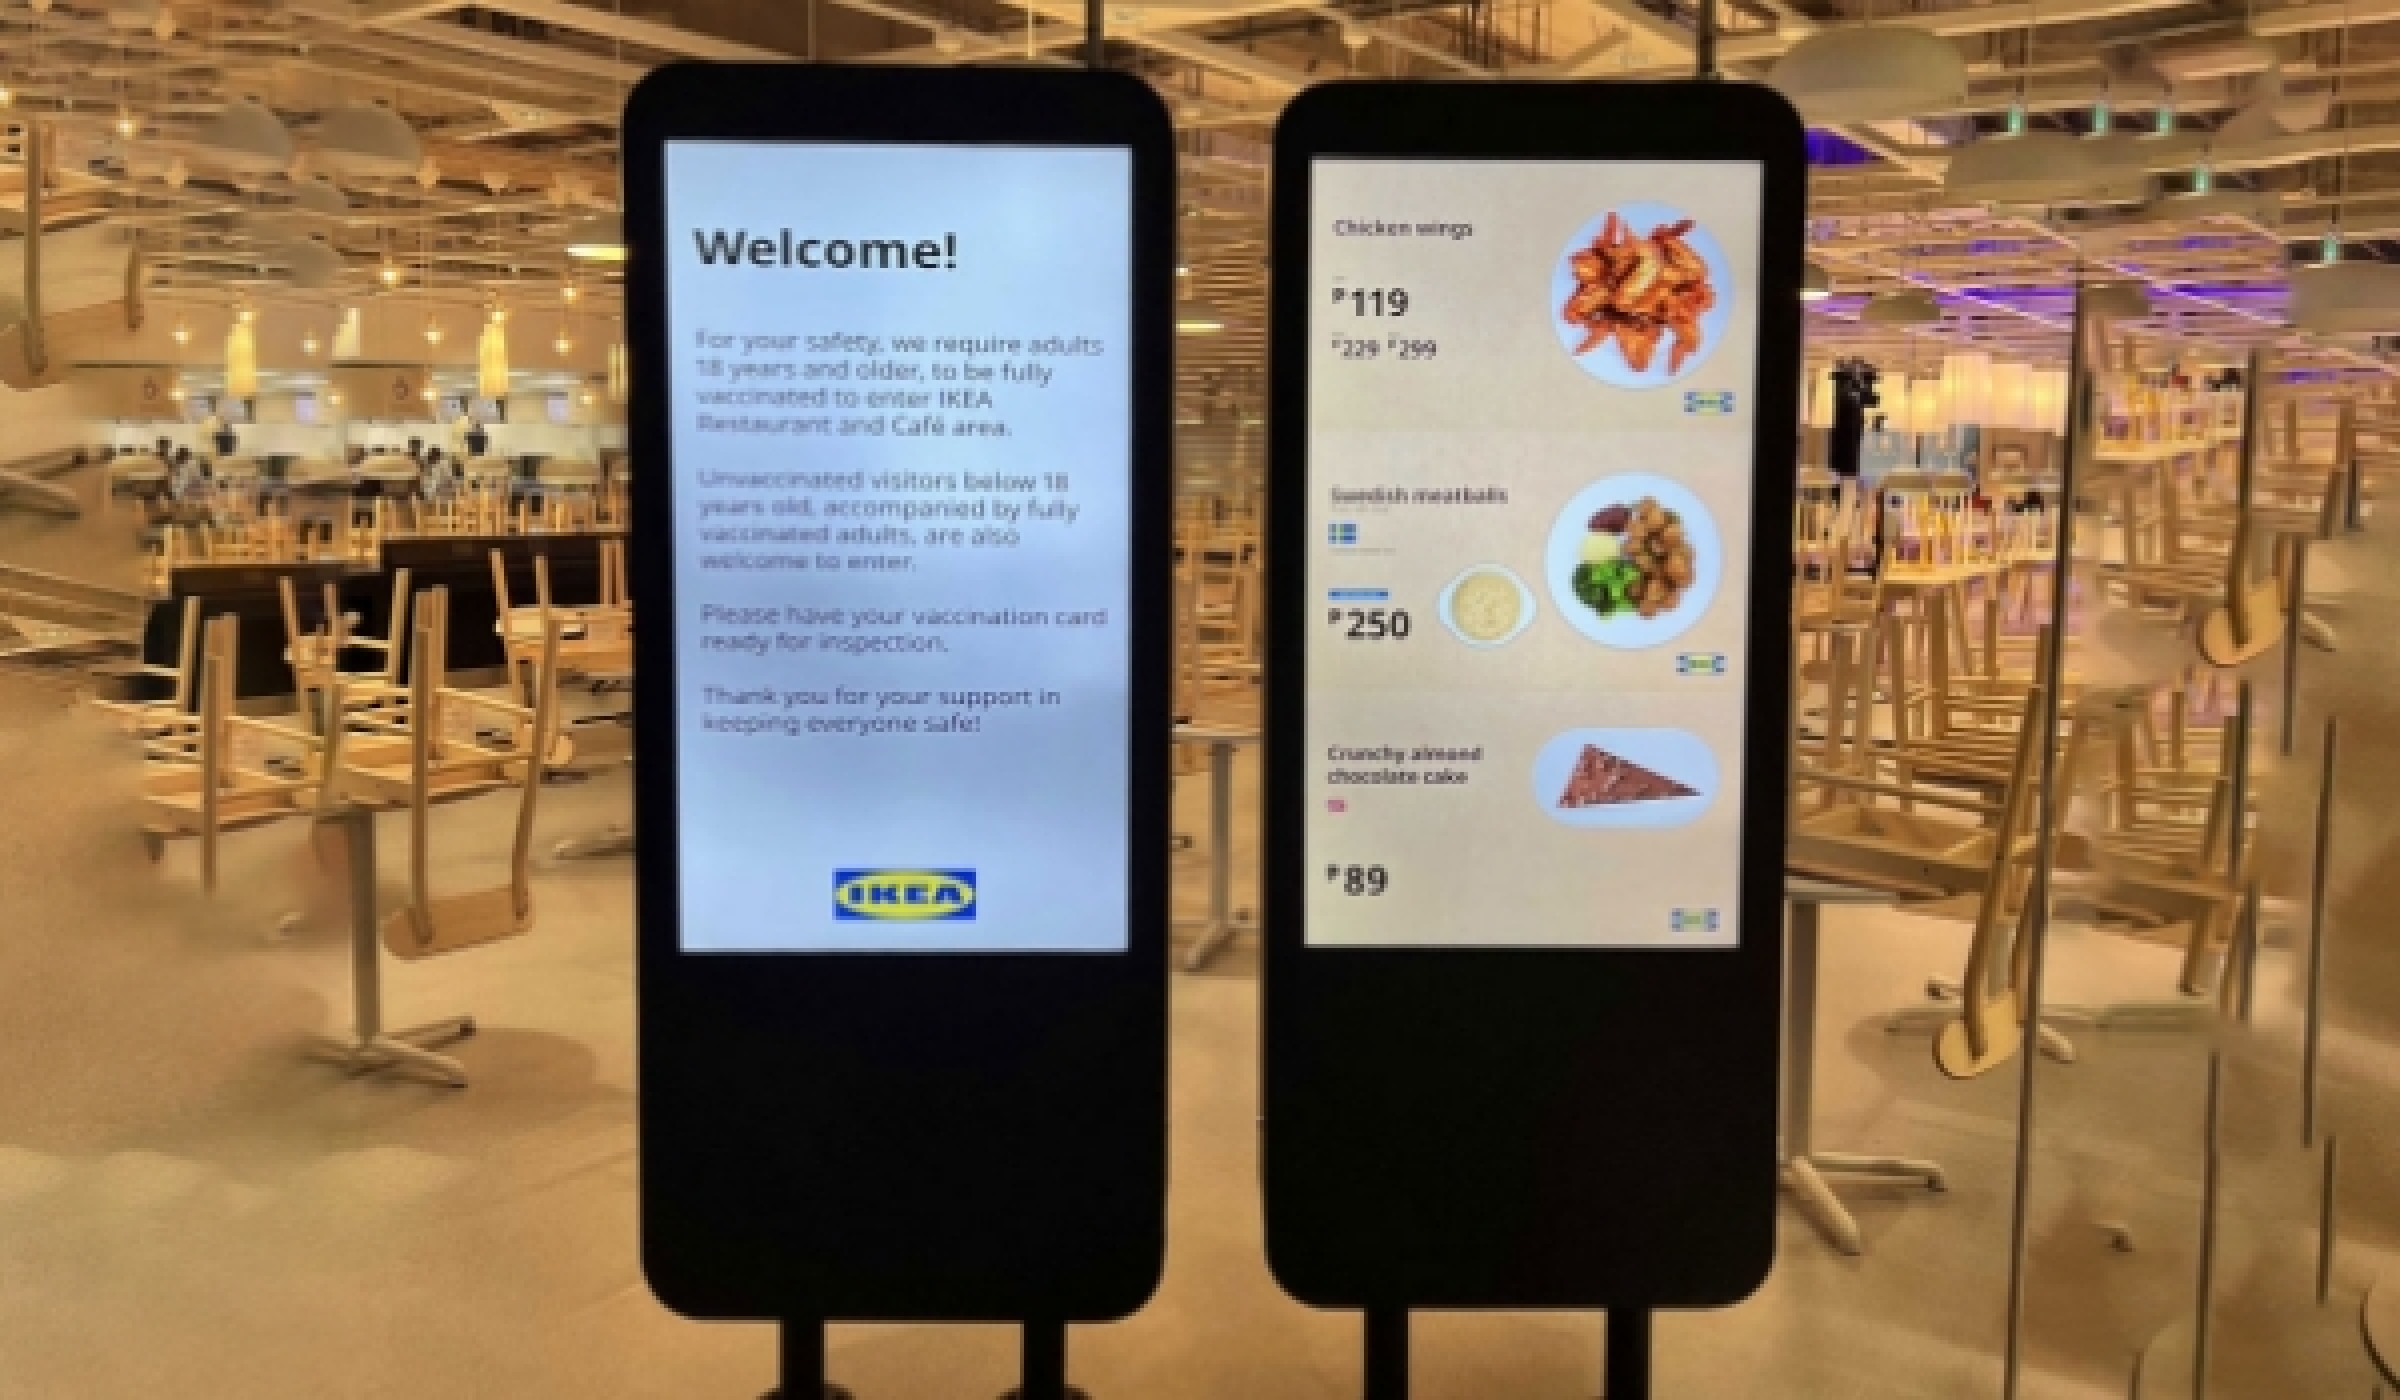 IKEA's digital signage placed at high-traffic areas